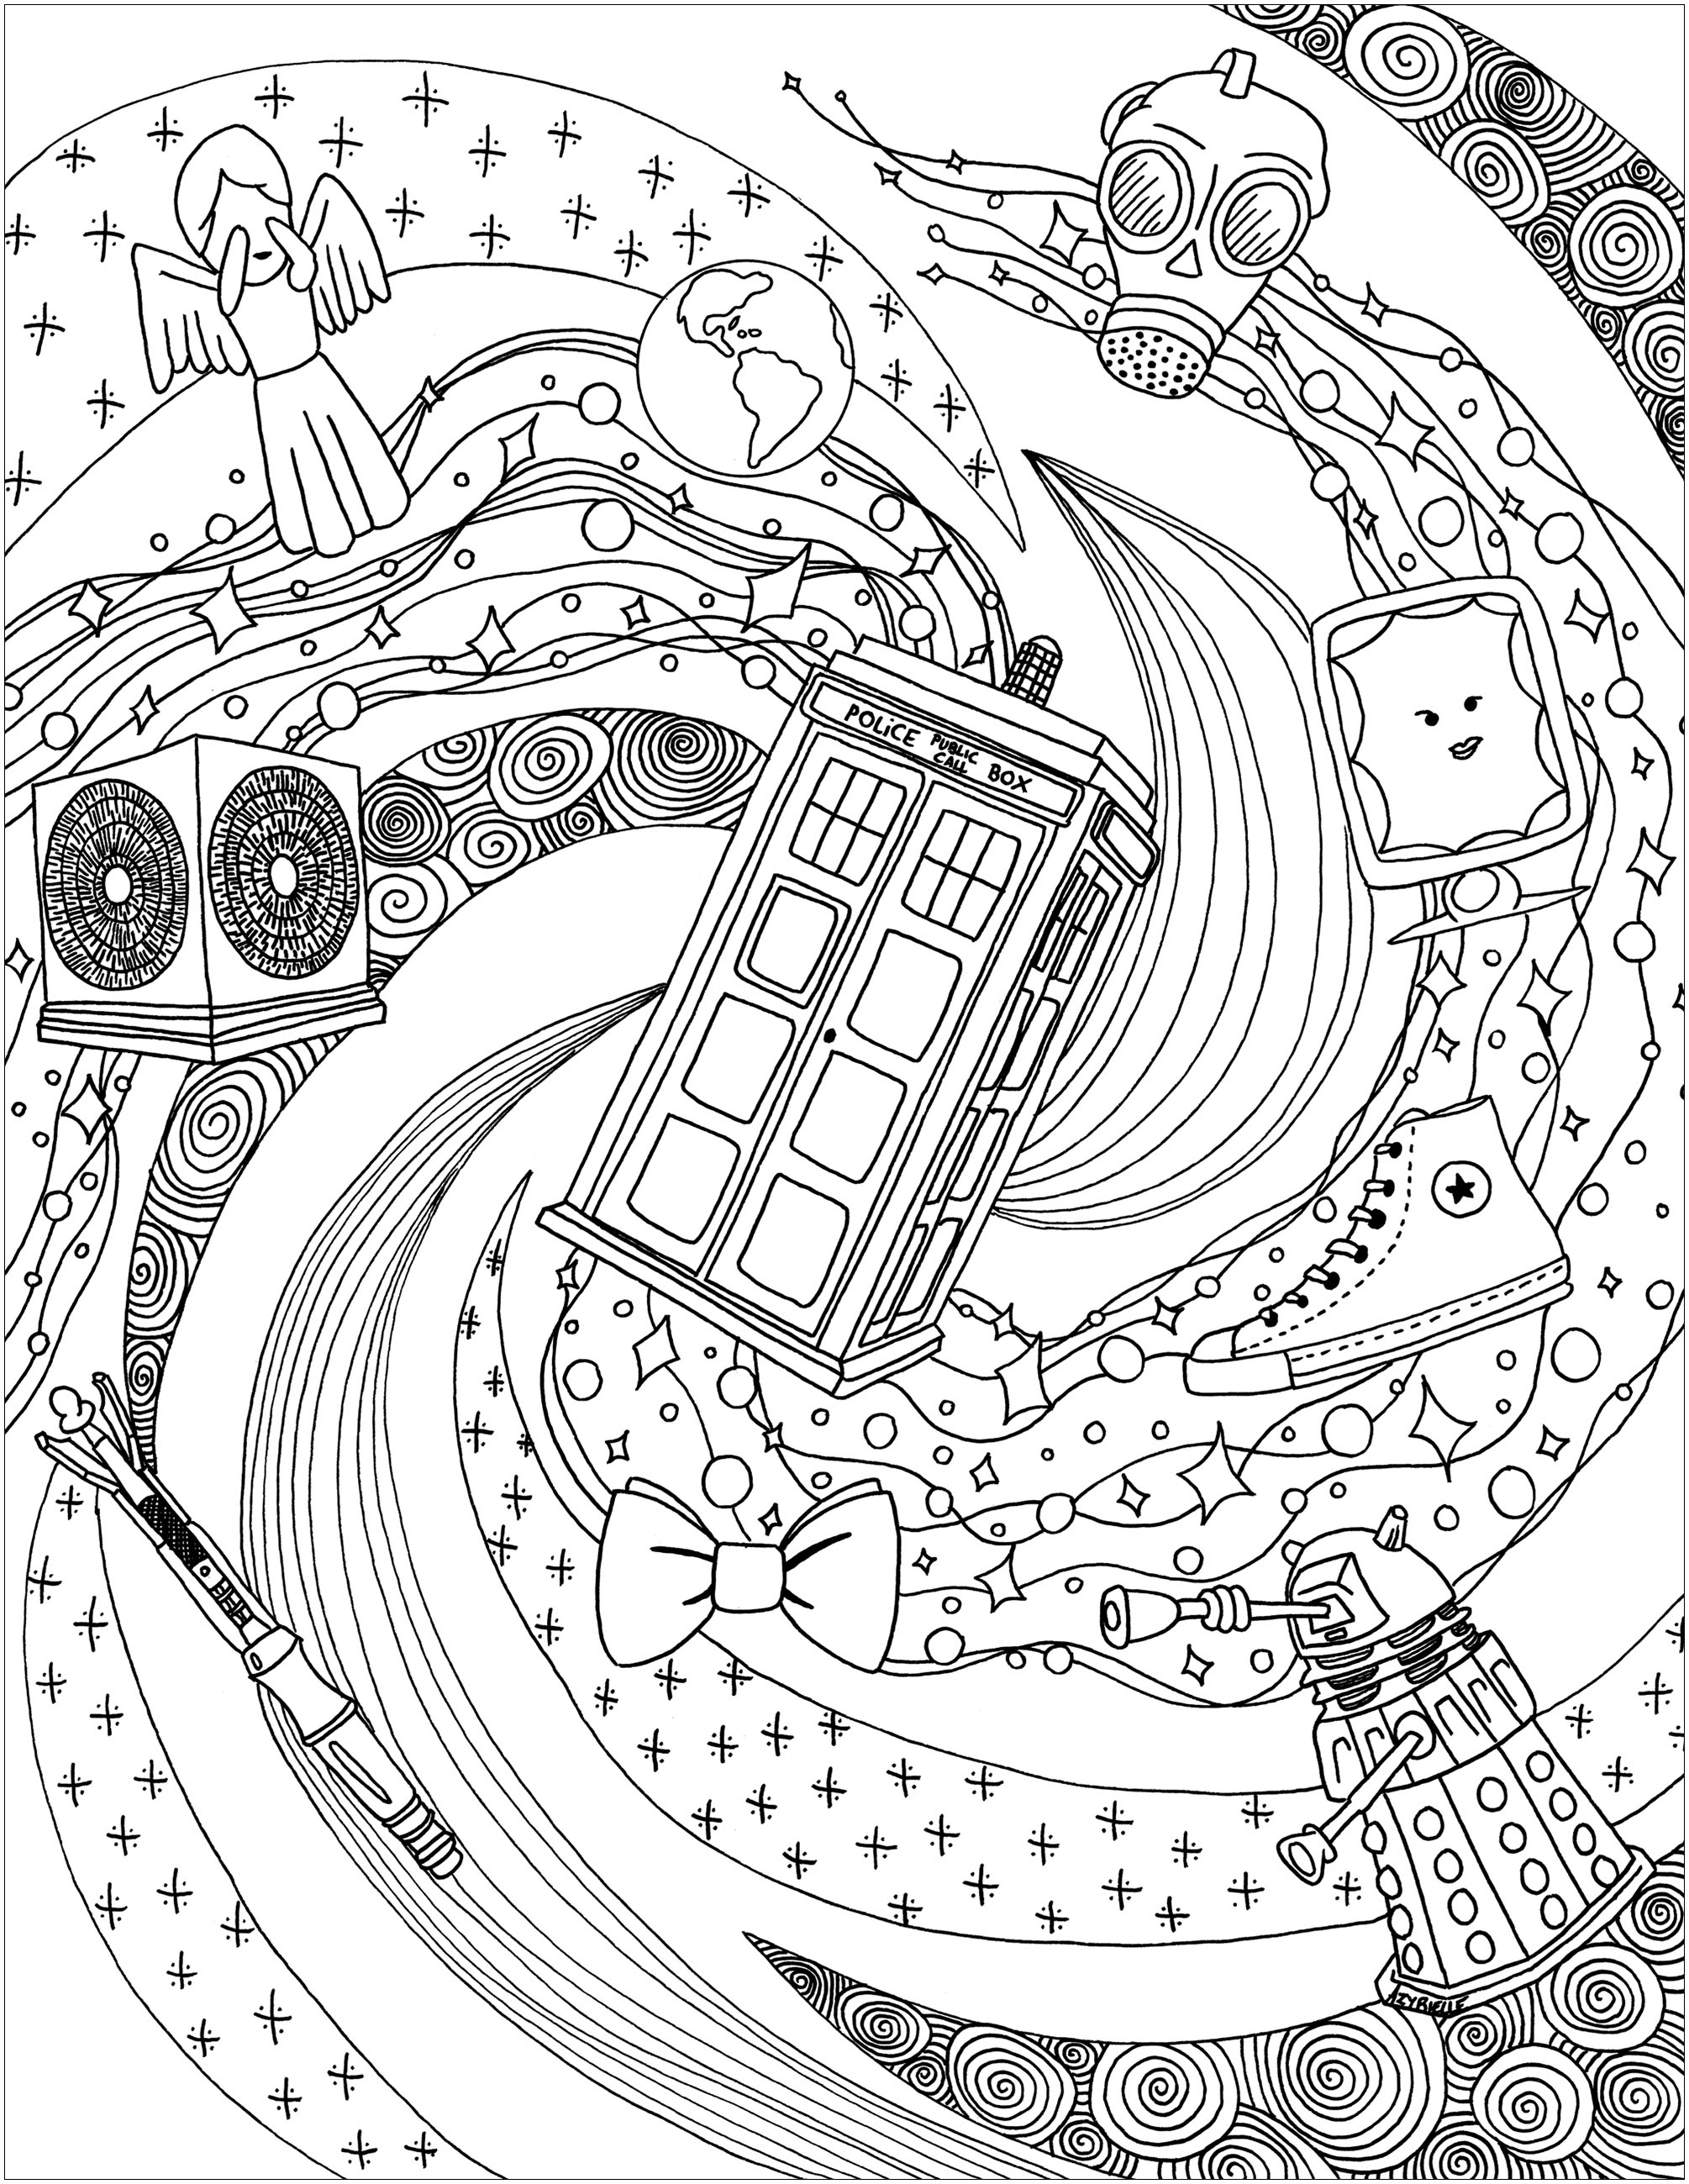 Enter into the world of Doctor Who with this coloring page inspired by this fantastic TV serie